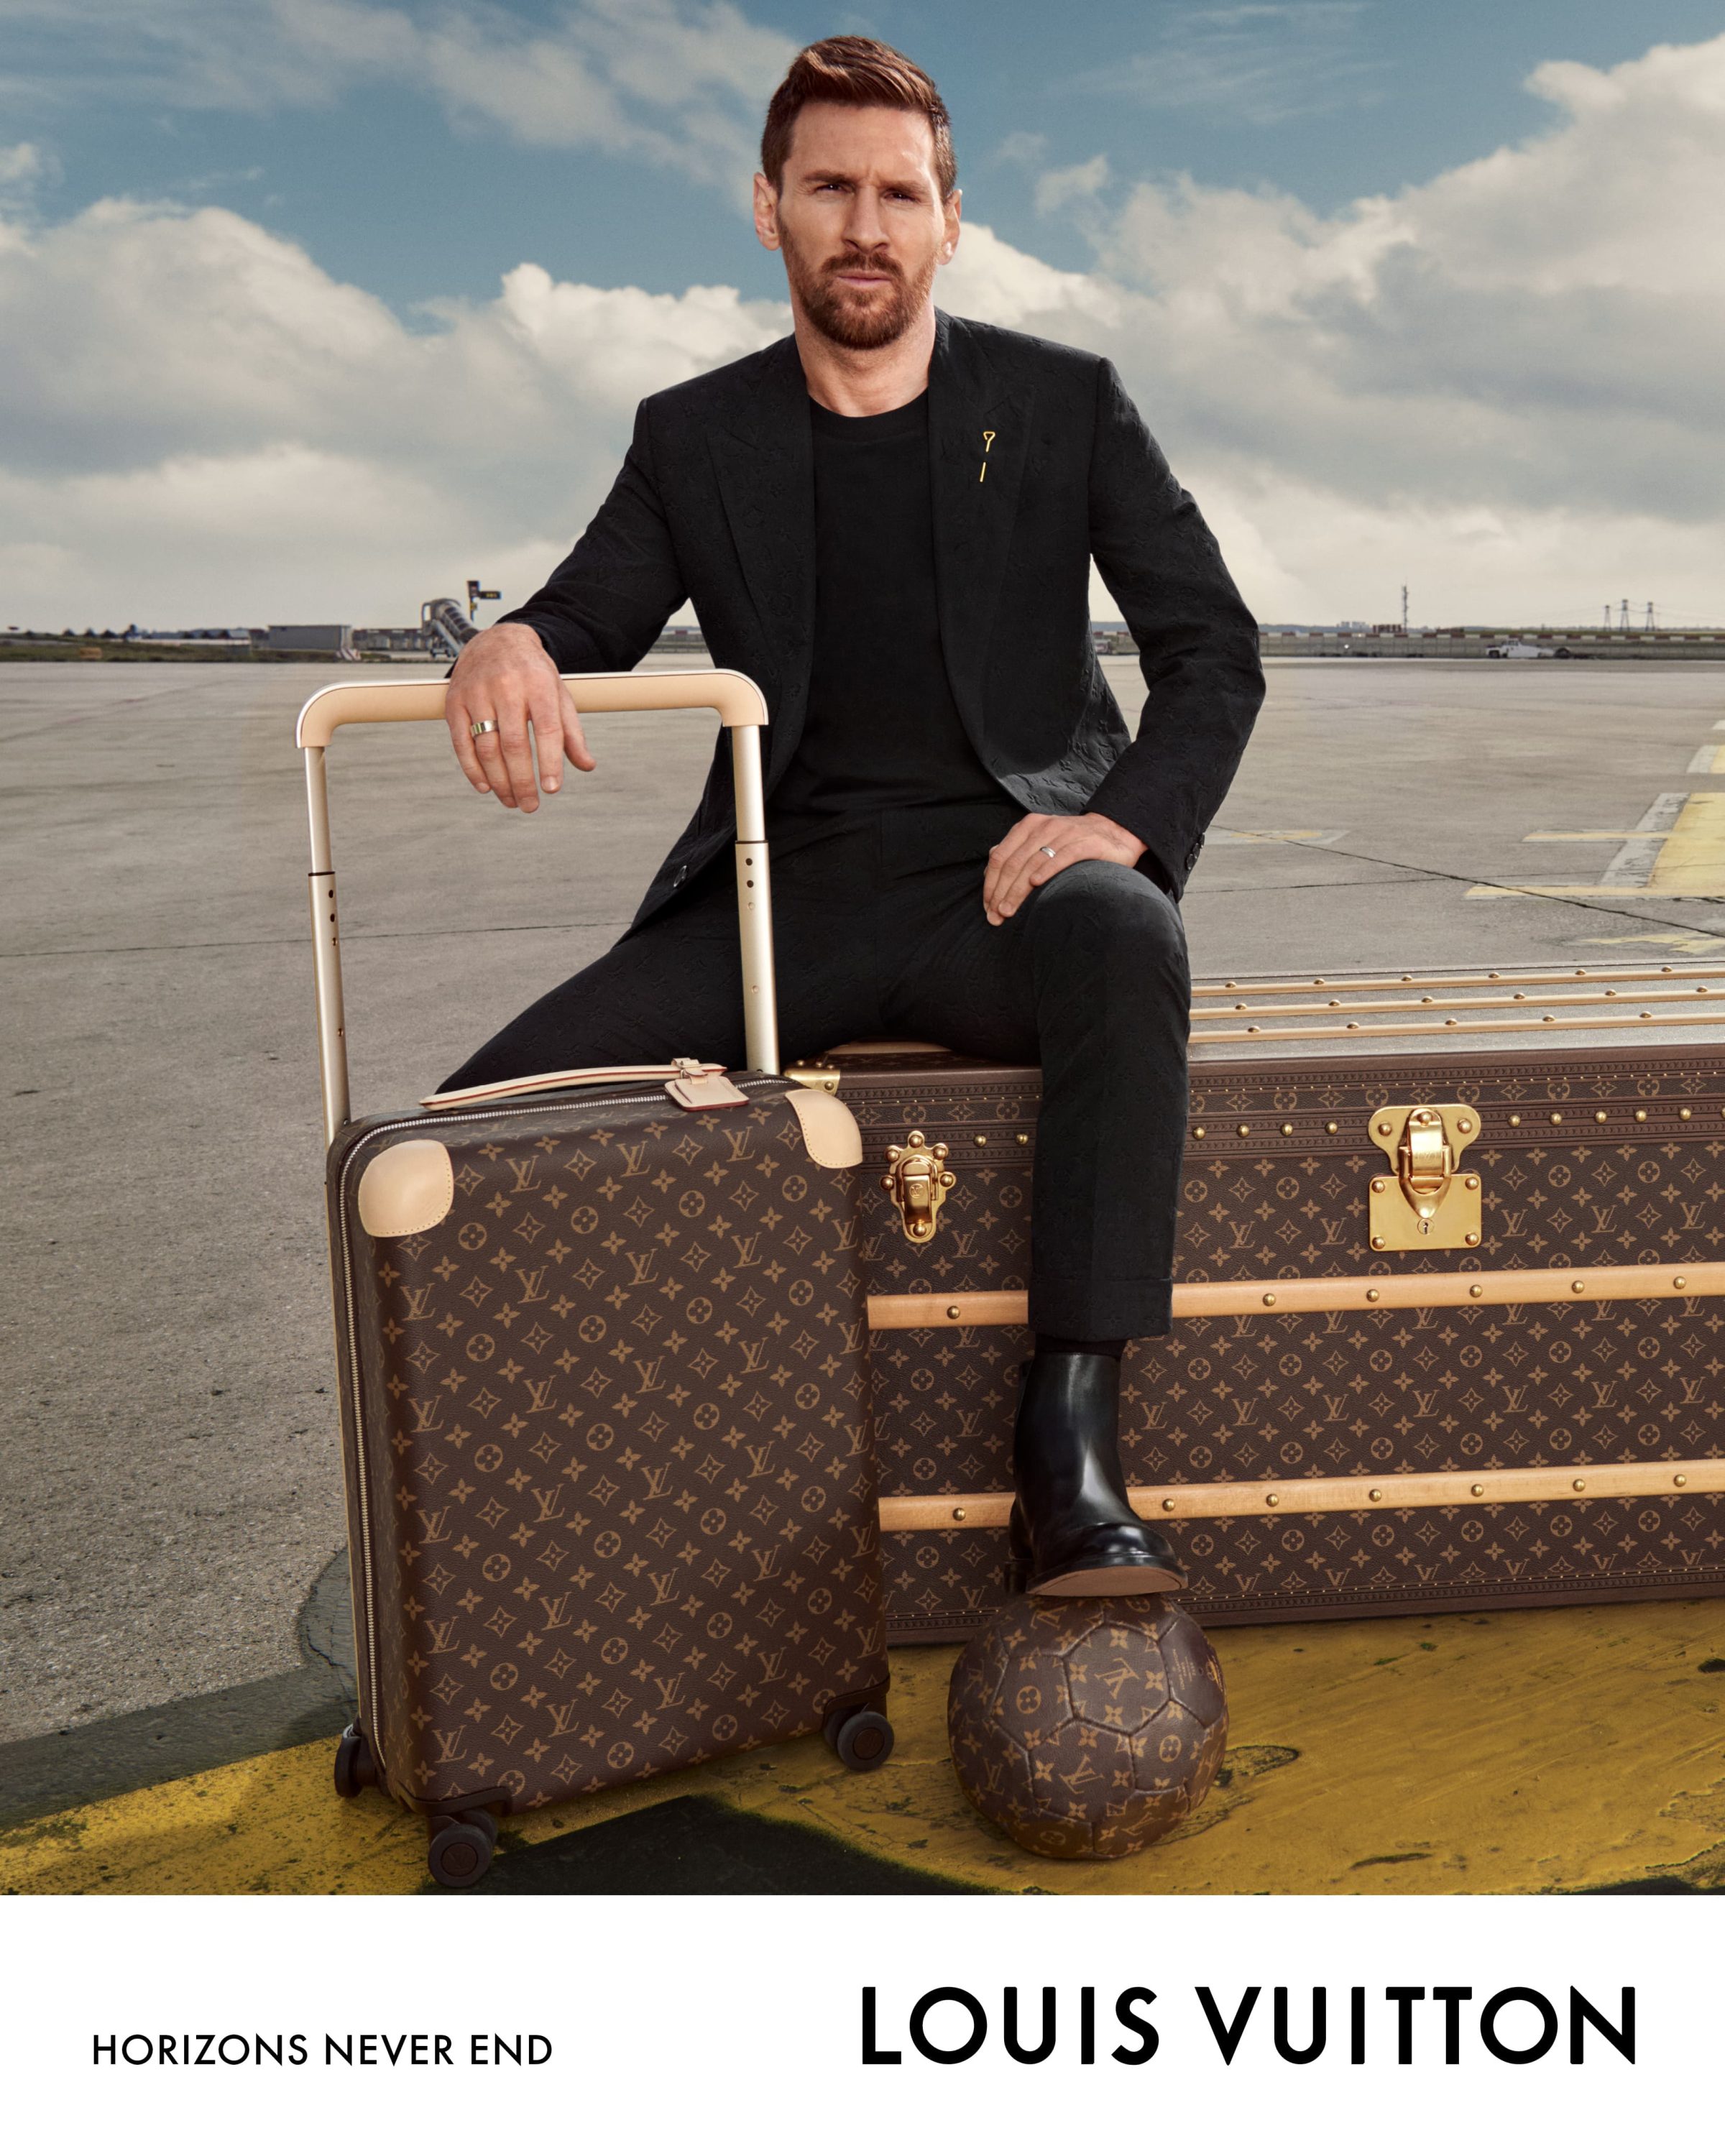 Lionel Messi Stars in Louis Vuitton 'Horizons Never End Travel